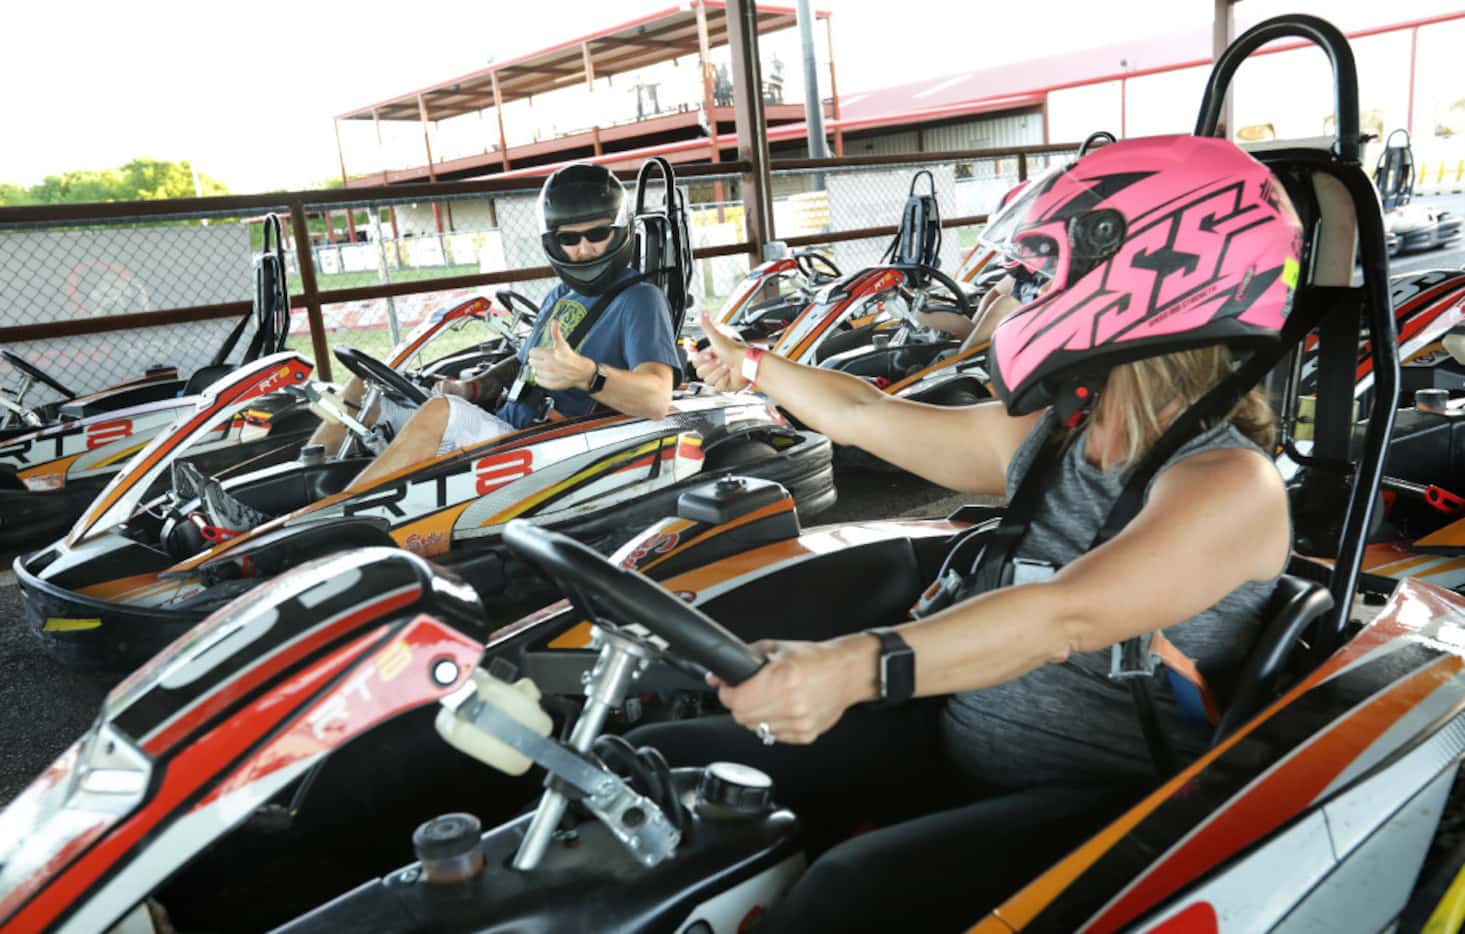 Nathan Majors, left, and Michelle Majors give a thumbs up as they prepare to race go-carts...